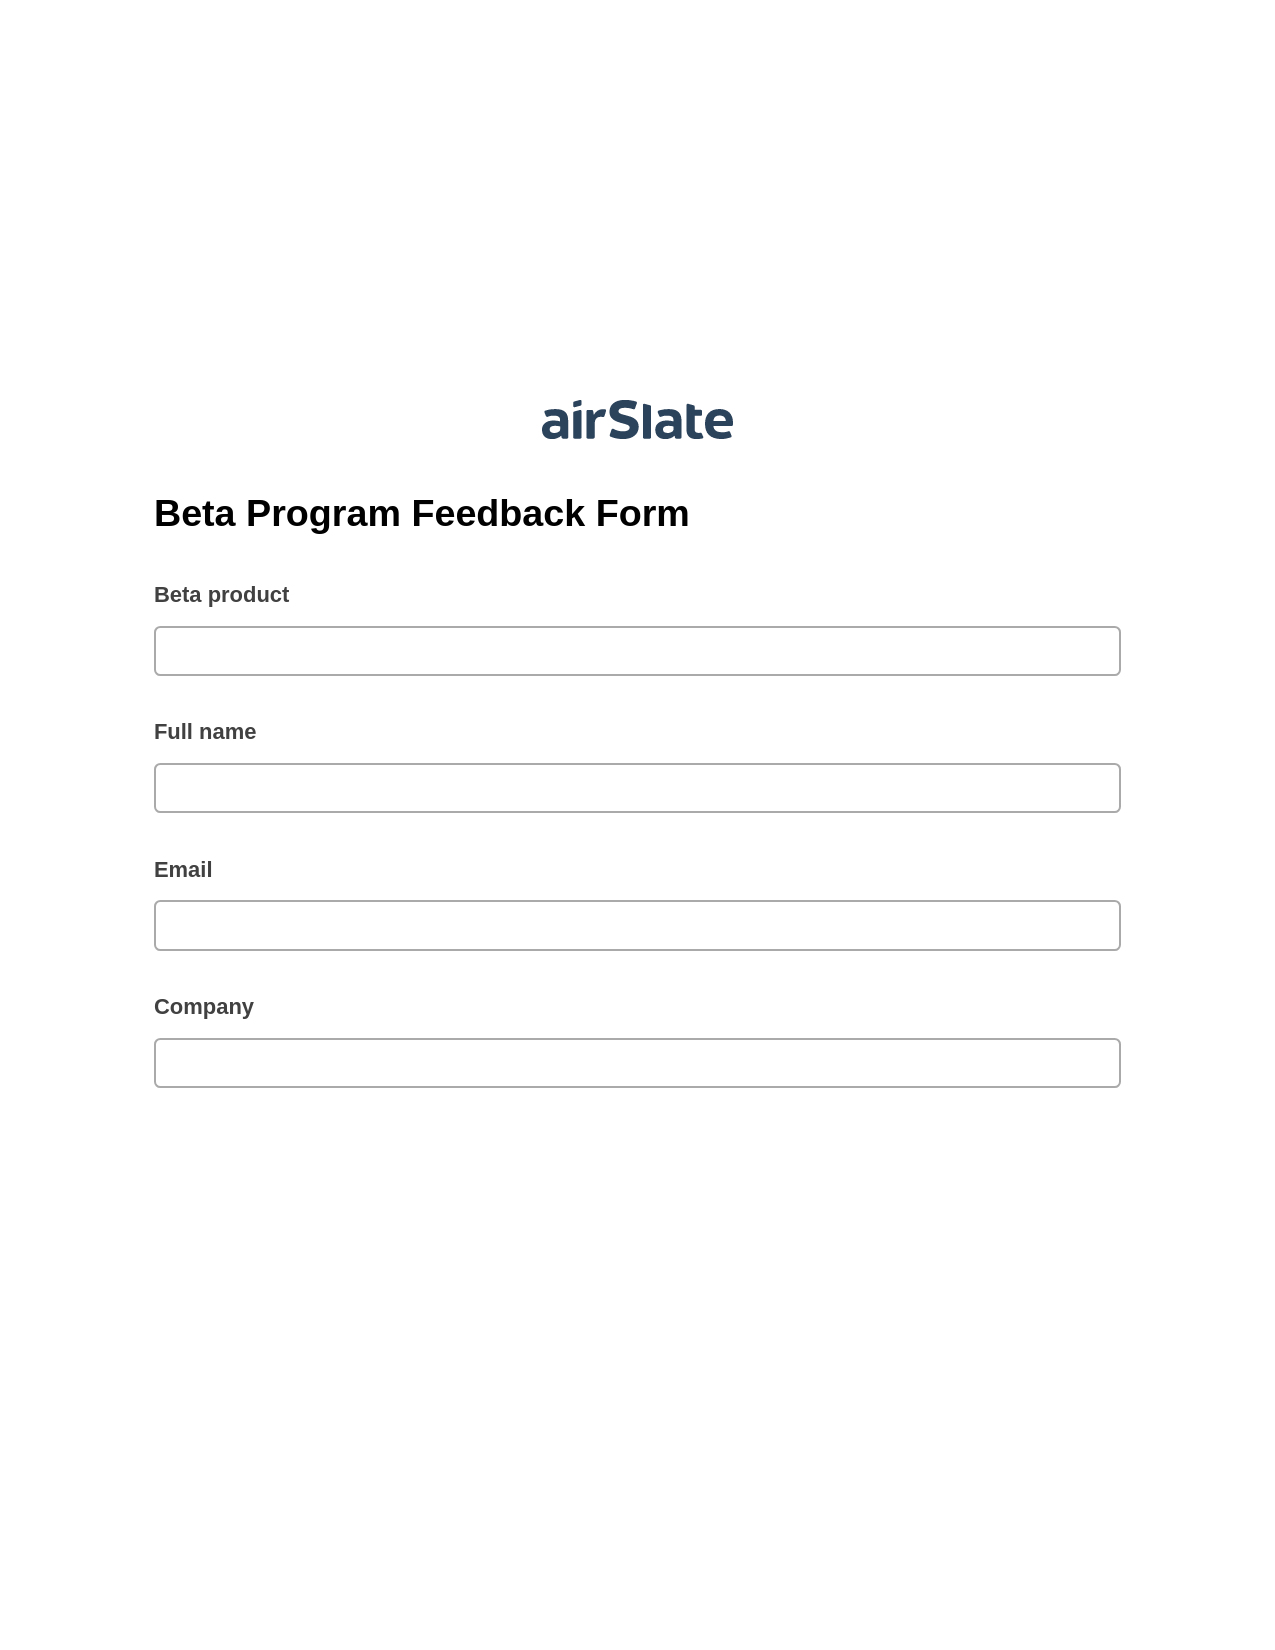 Beta Program Feedback Form Pre-fill from Salesforce Record Bot, Document Hide Bot, Archive to SharePoint Folder Bot